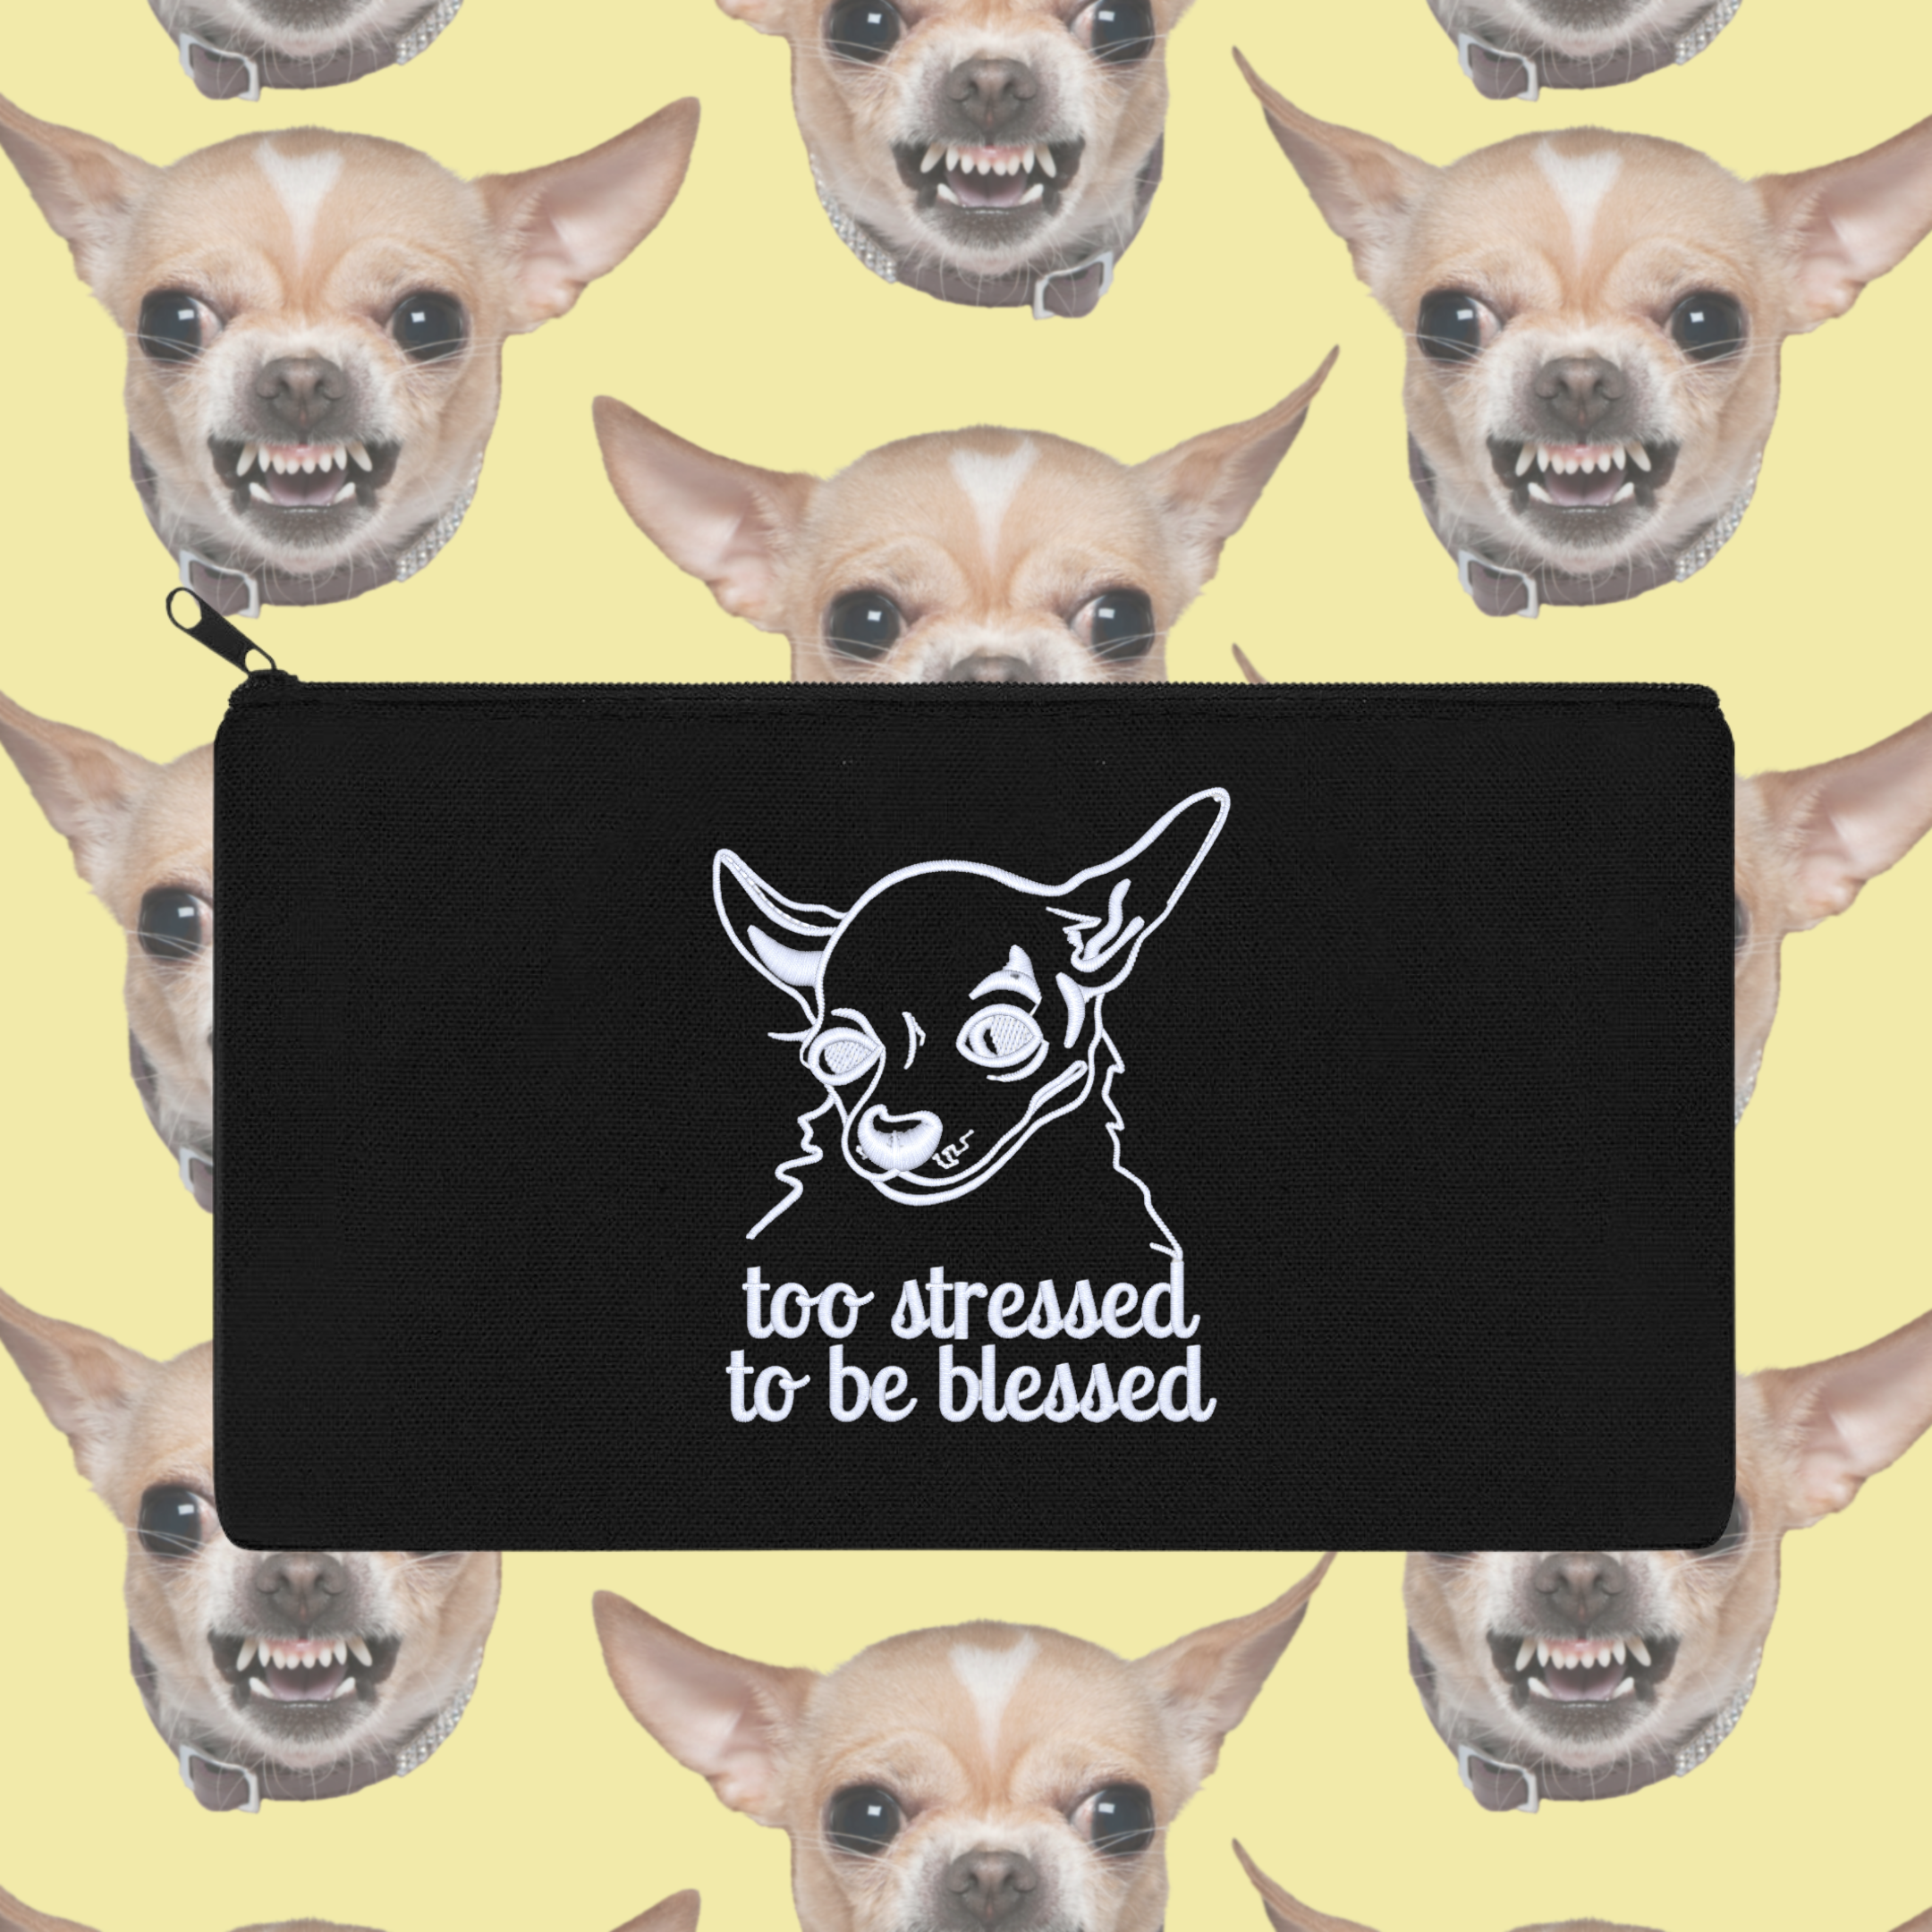 Too Stressed to be Blessed Anxious Chihuahua Embroidered Multipurpose Zipper Pouch Bag